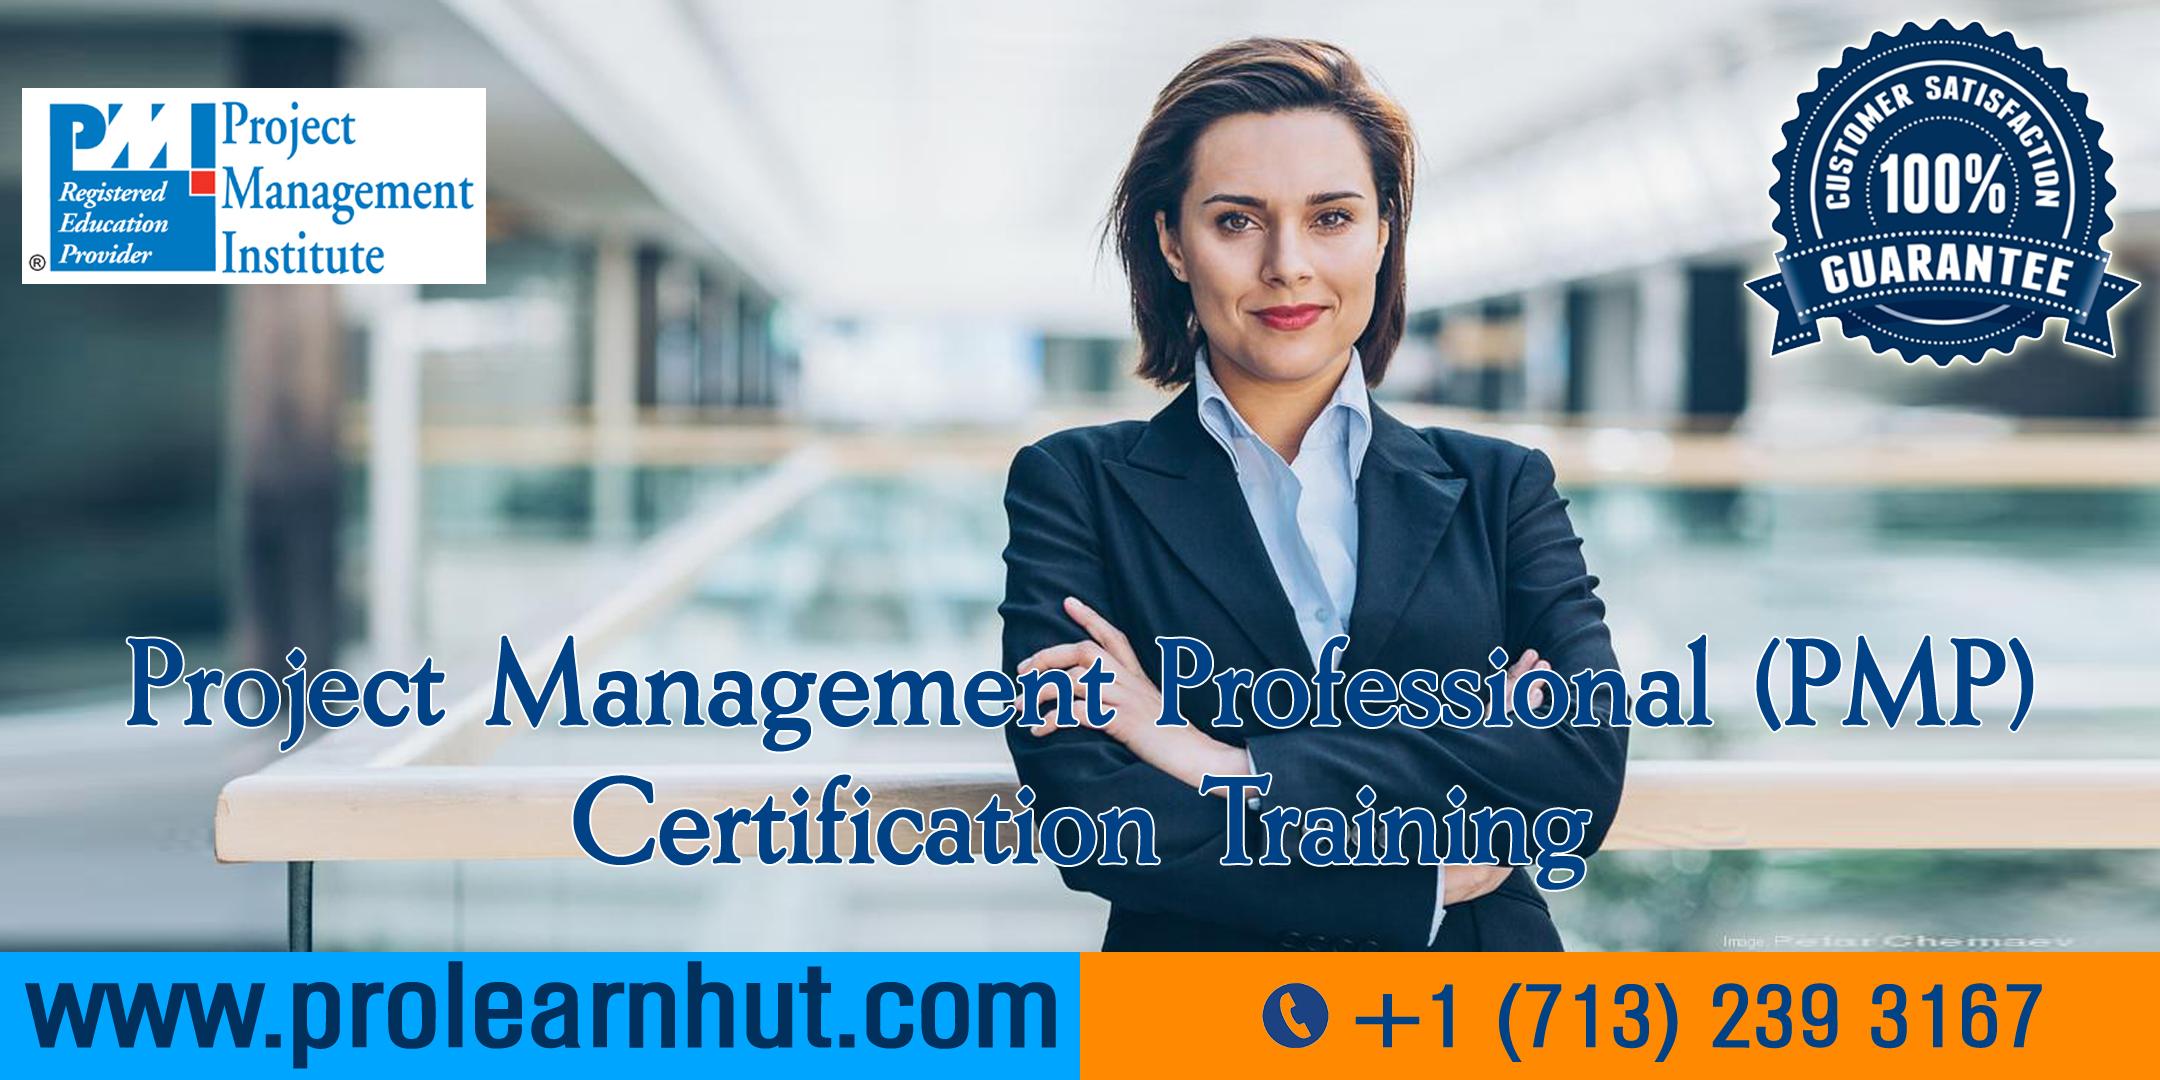 PMP Certification | Project Management Certification| PMP Training in Pasadena, CA | ProLearnHut